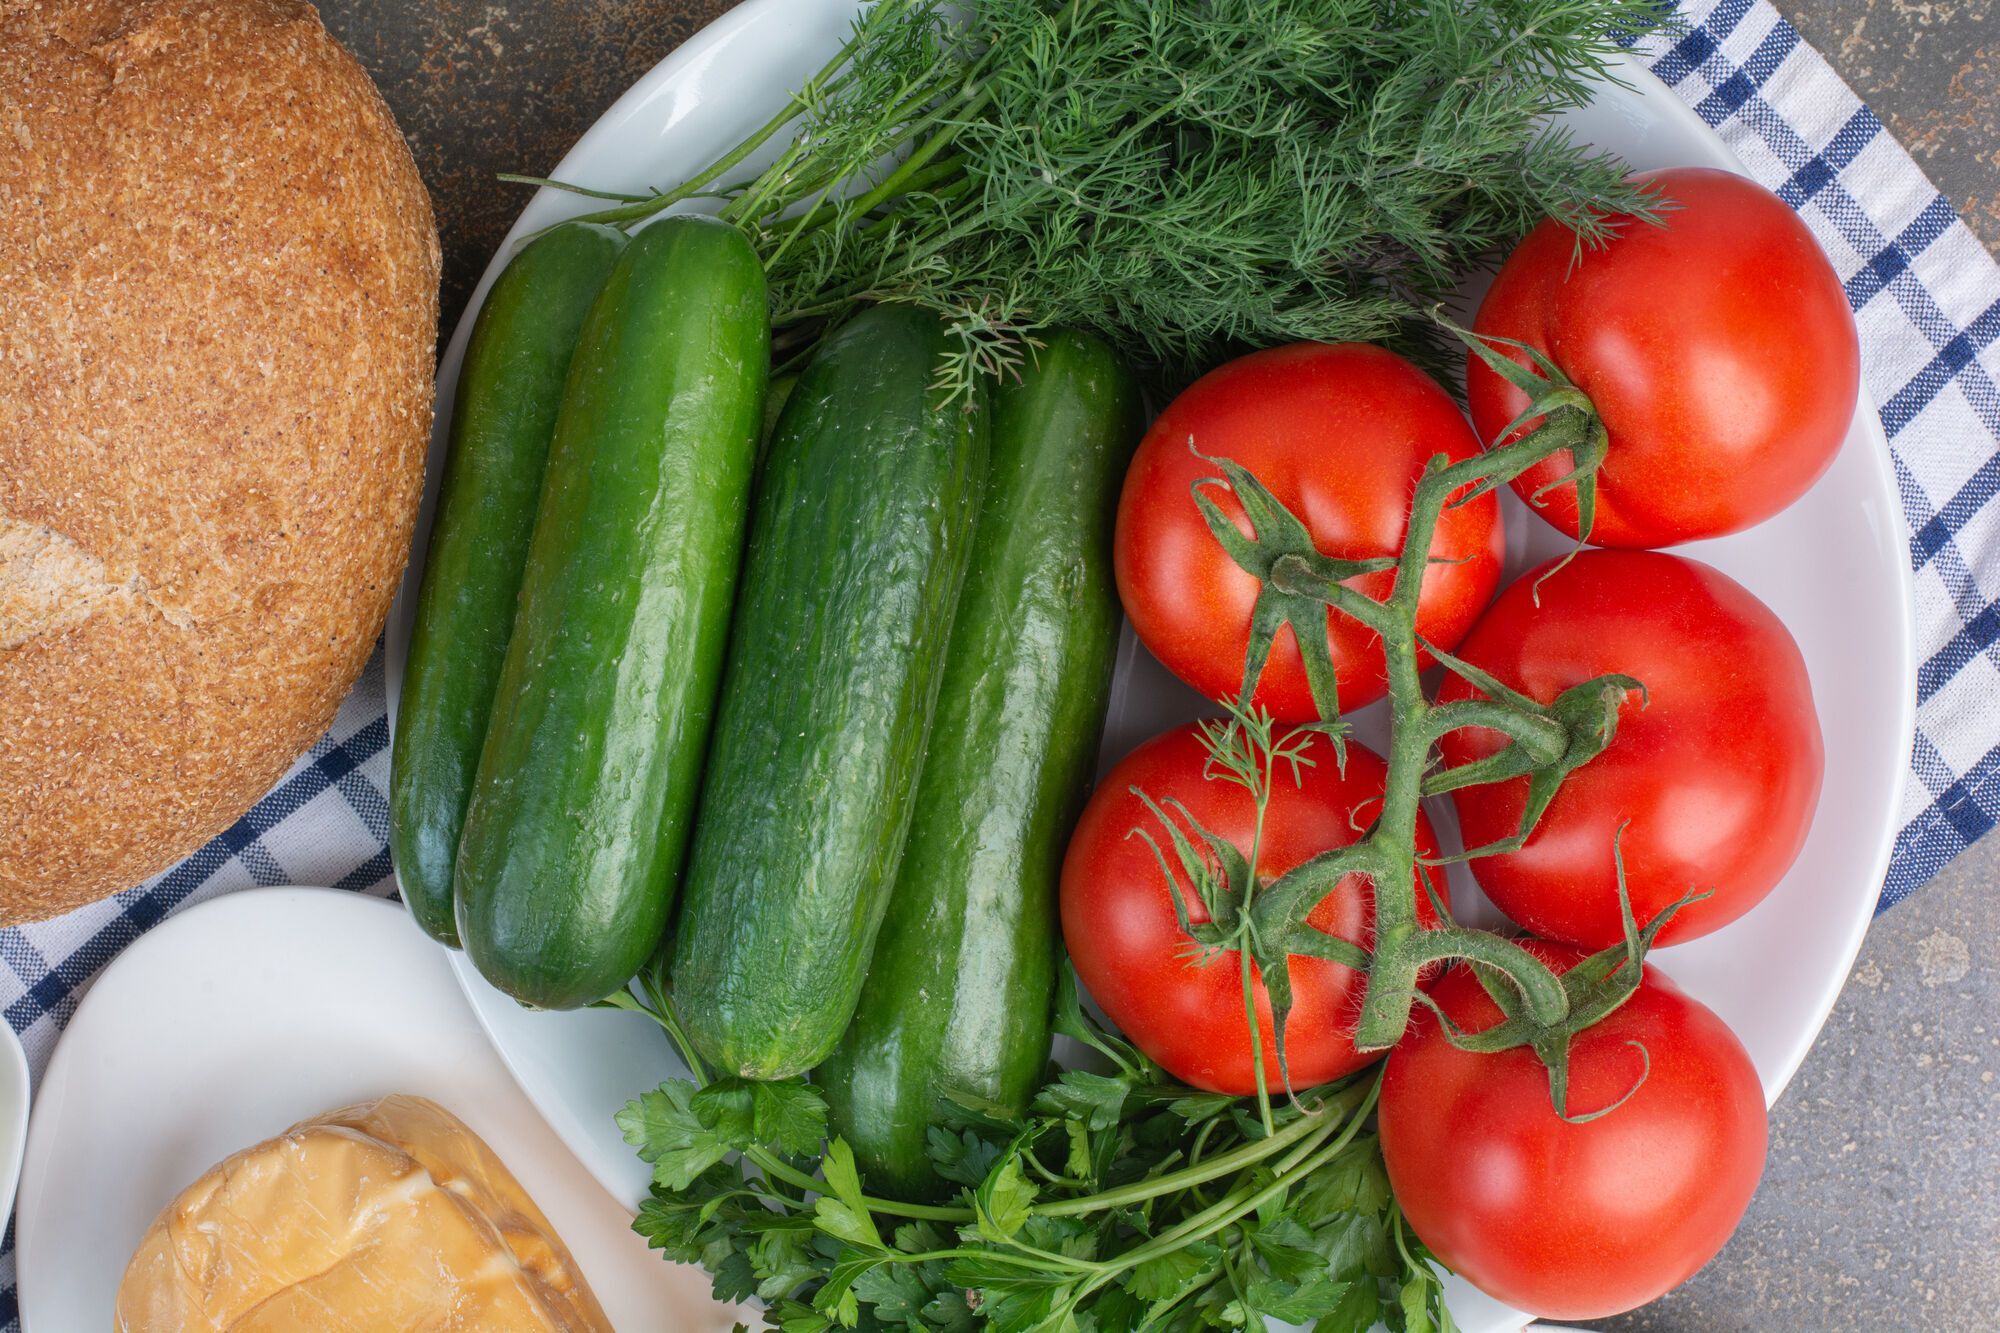 How to properly wash cucumbers and tomatoes and why use salt